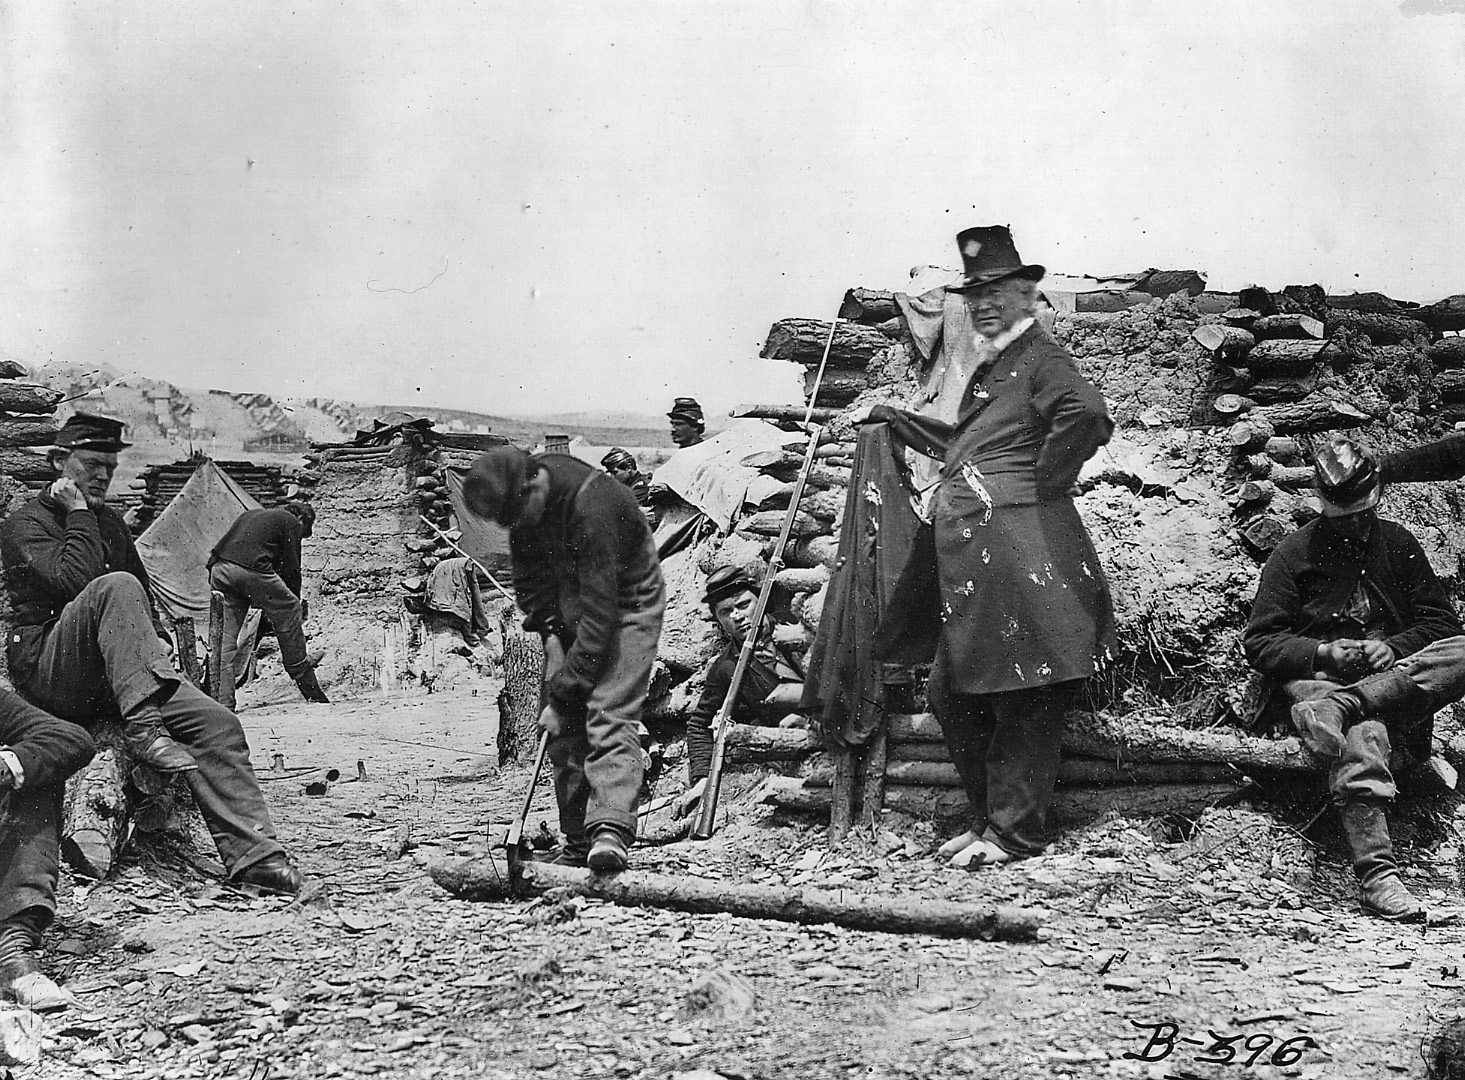 Soldiers chop wood and use mud to build winter quarters. The older soldier, second from the right, is probably an officer, judging from his dress and age.